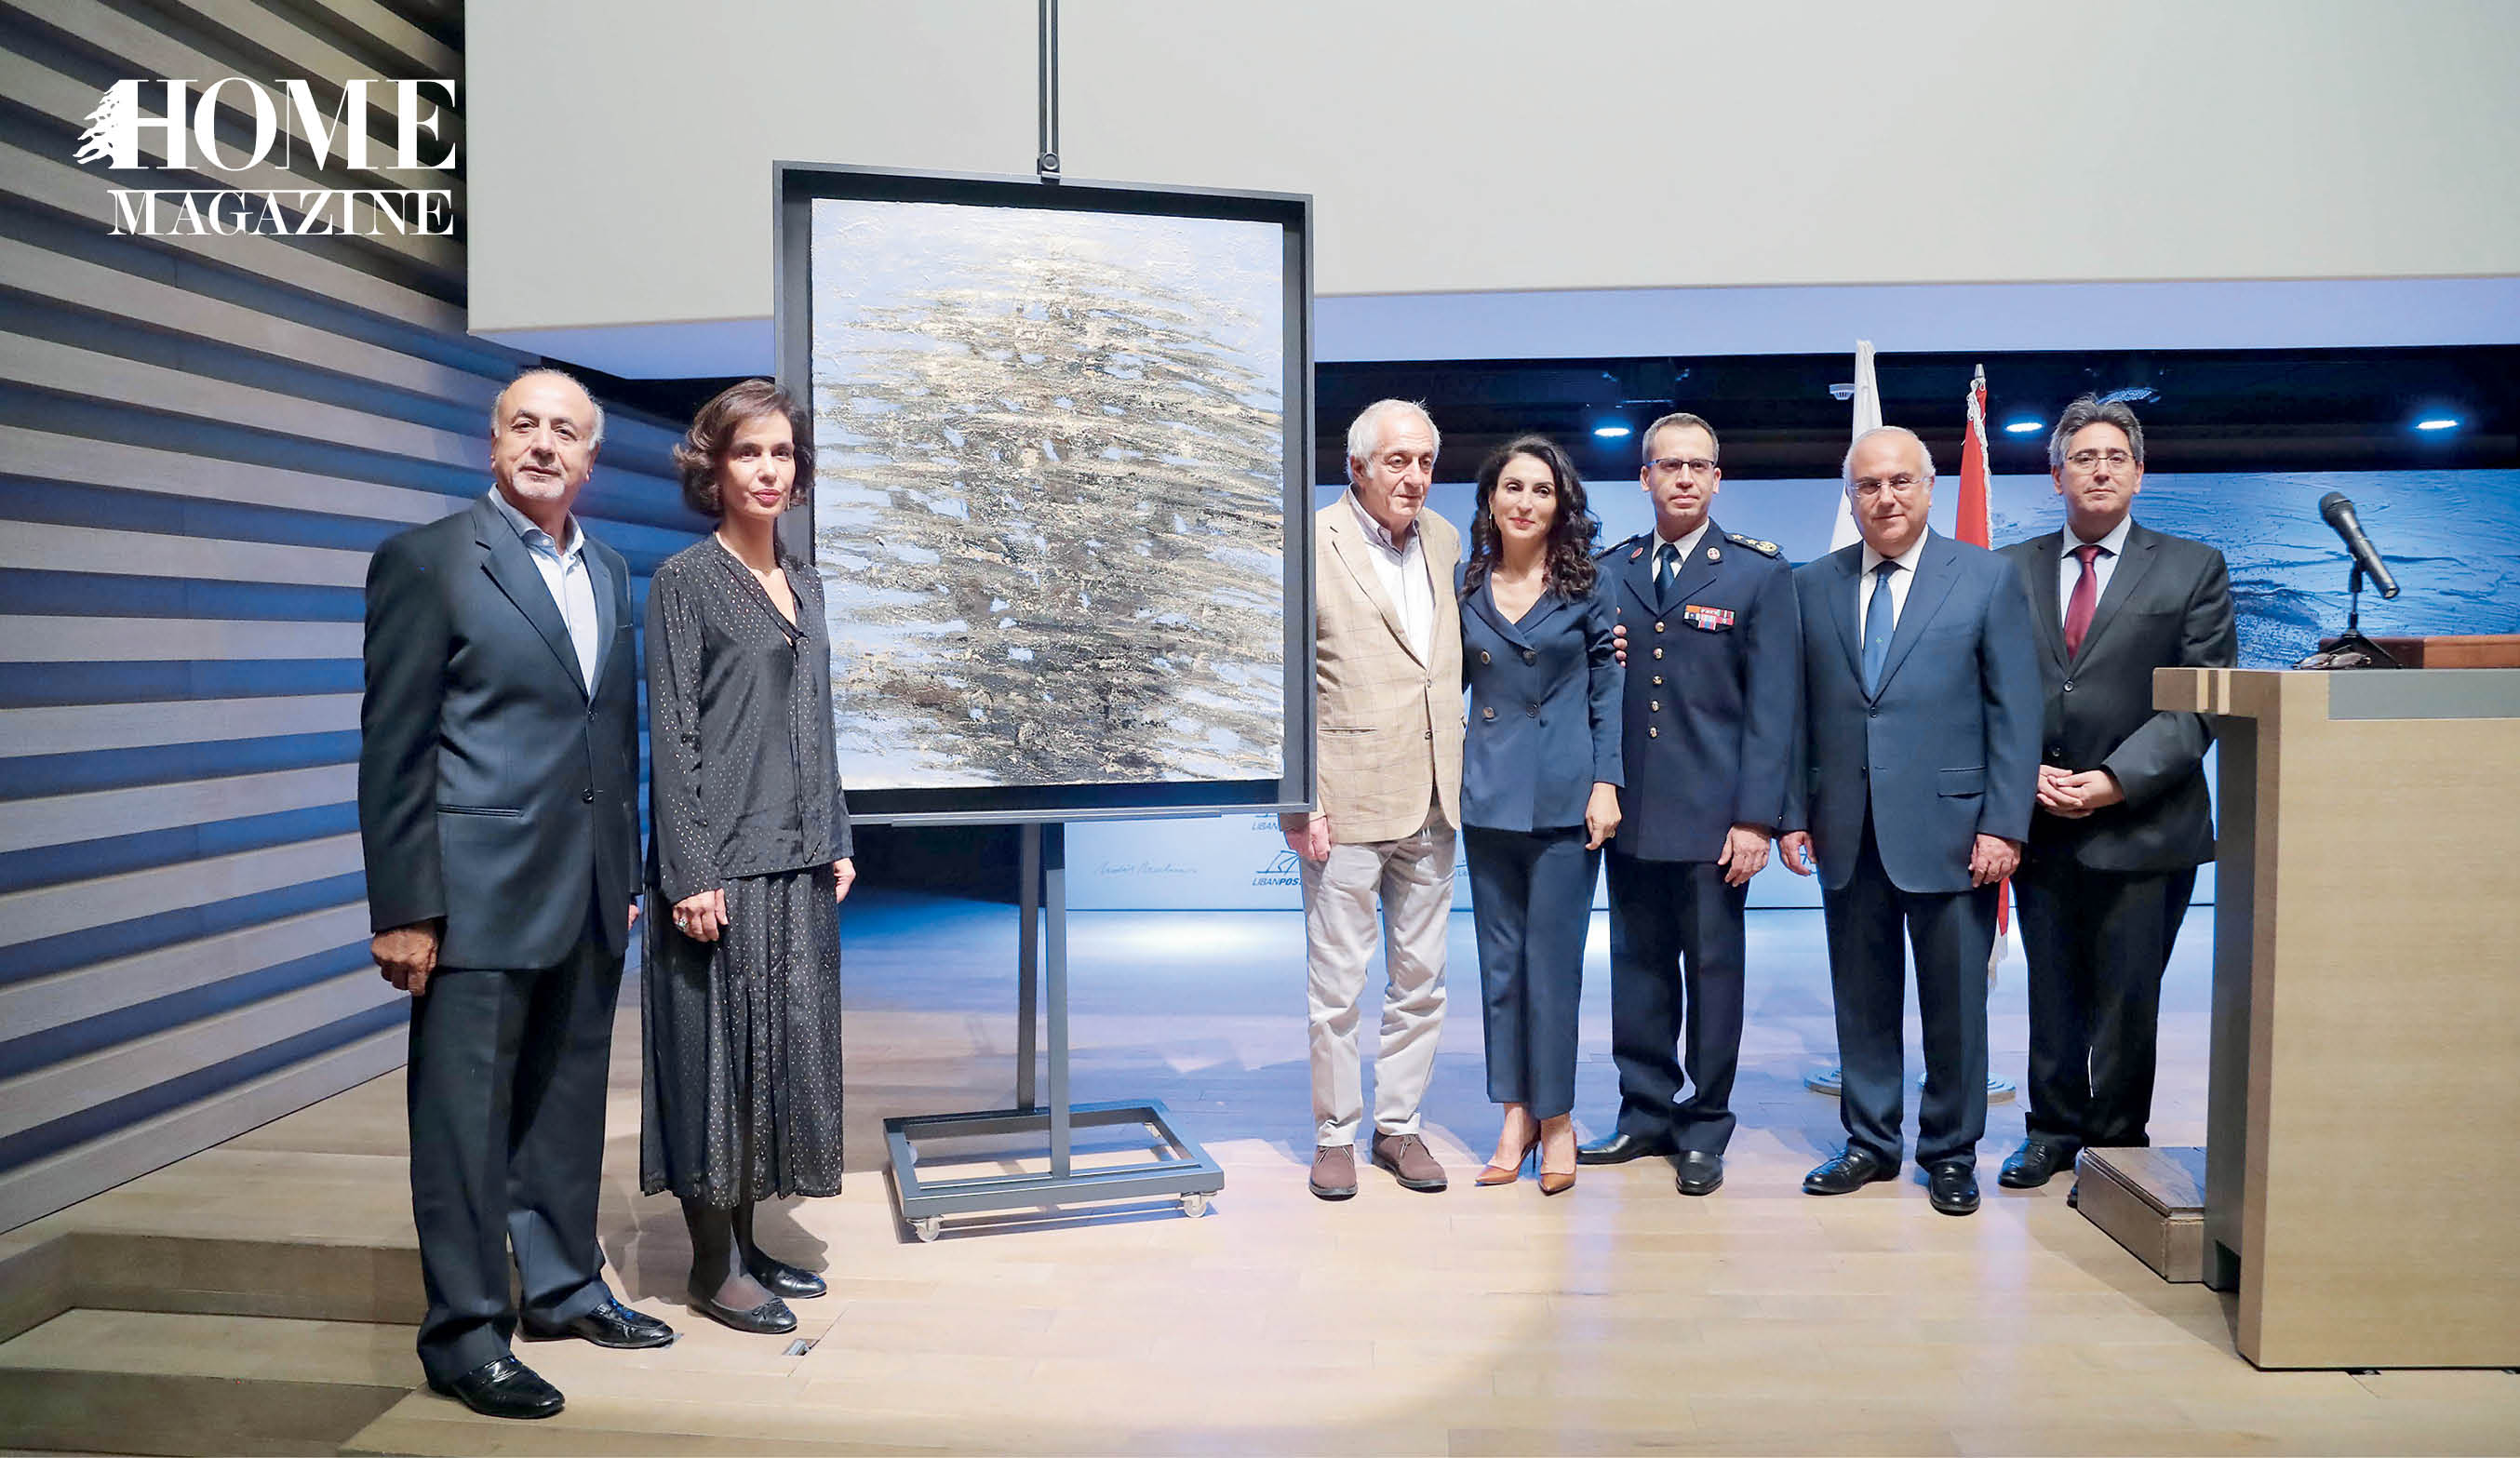 Men and women standing next to a painting